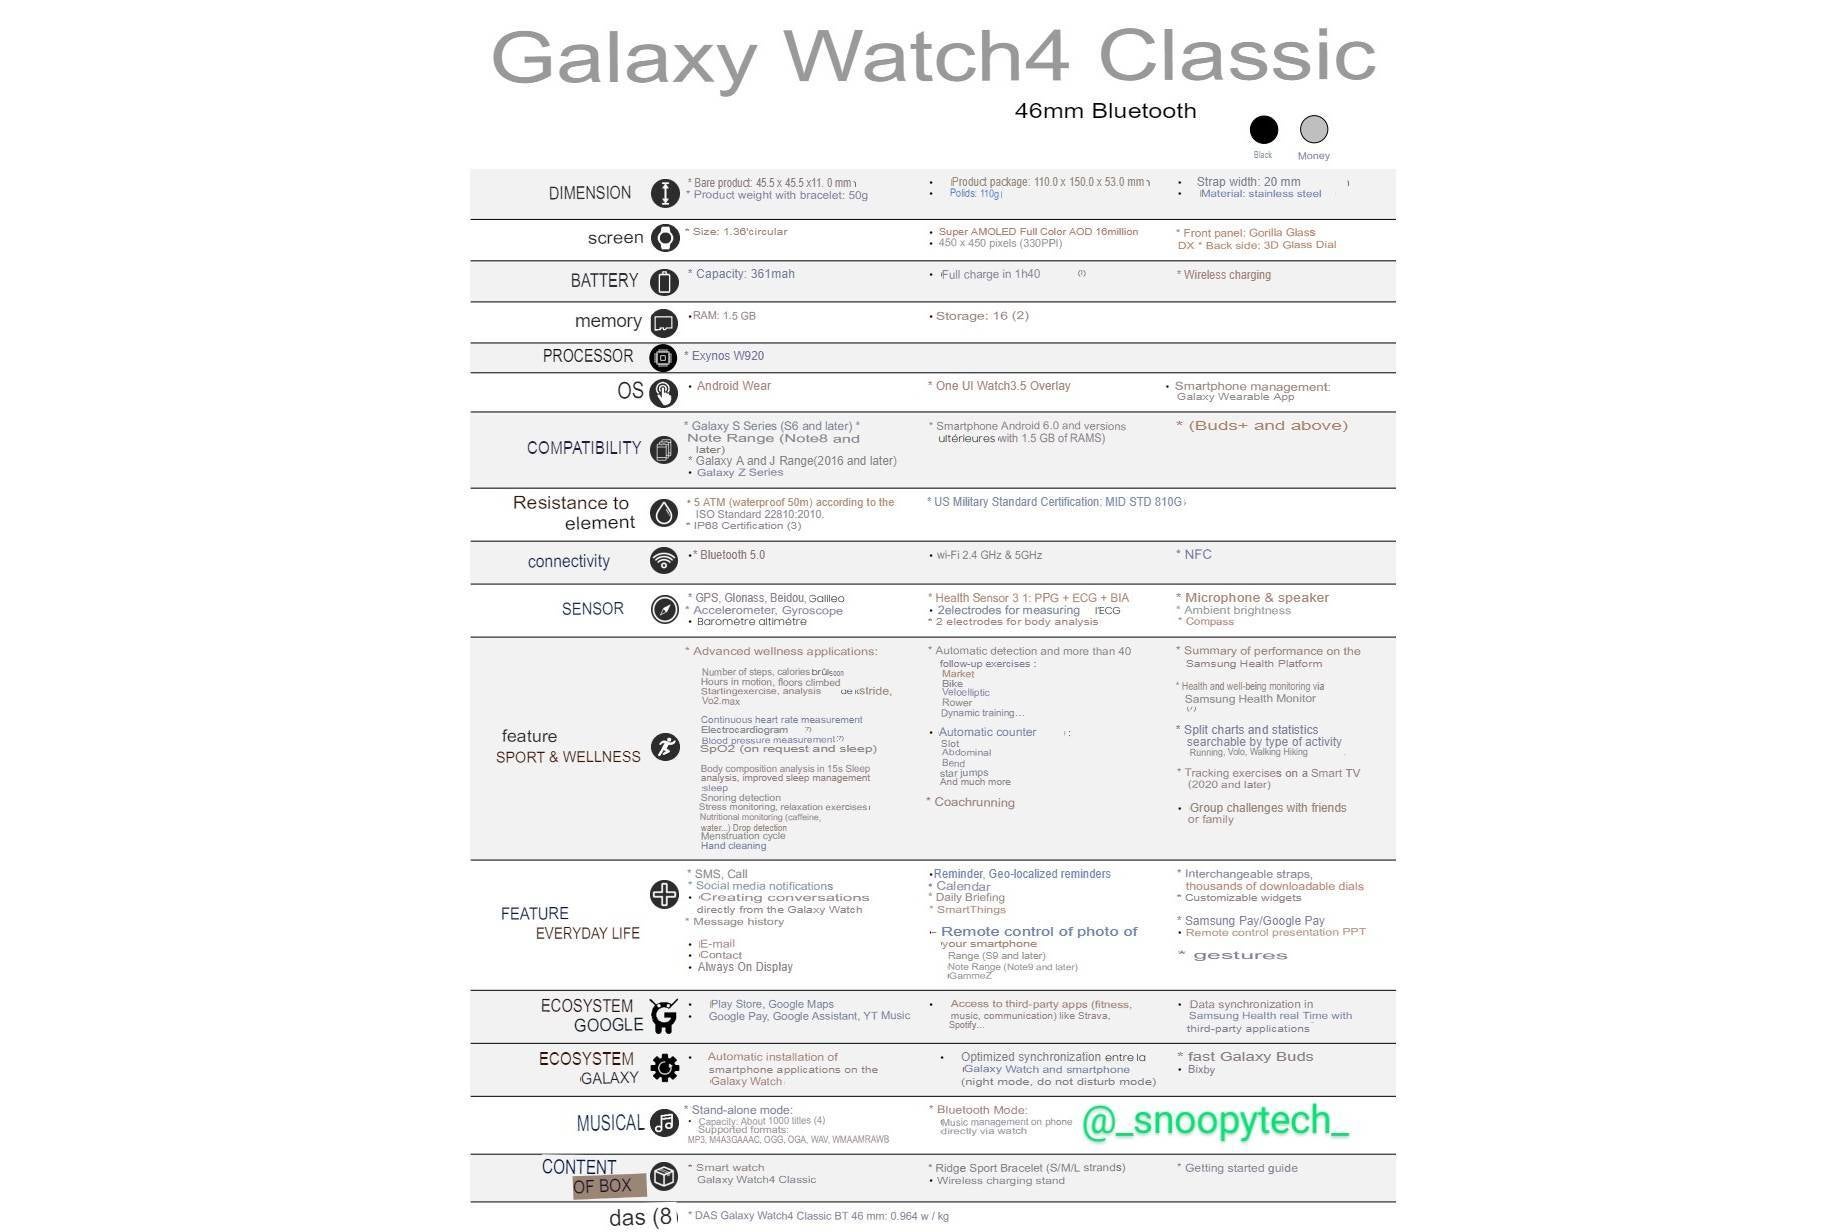 Galaxy Watch 4 Classic alleged specs sheet - Leak indicates Galaxy Watch 4 and Classic are basically the same watch with different exteriors